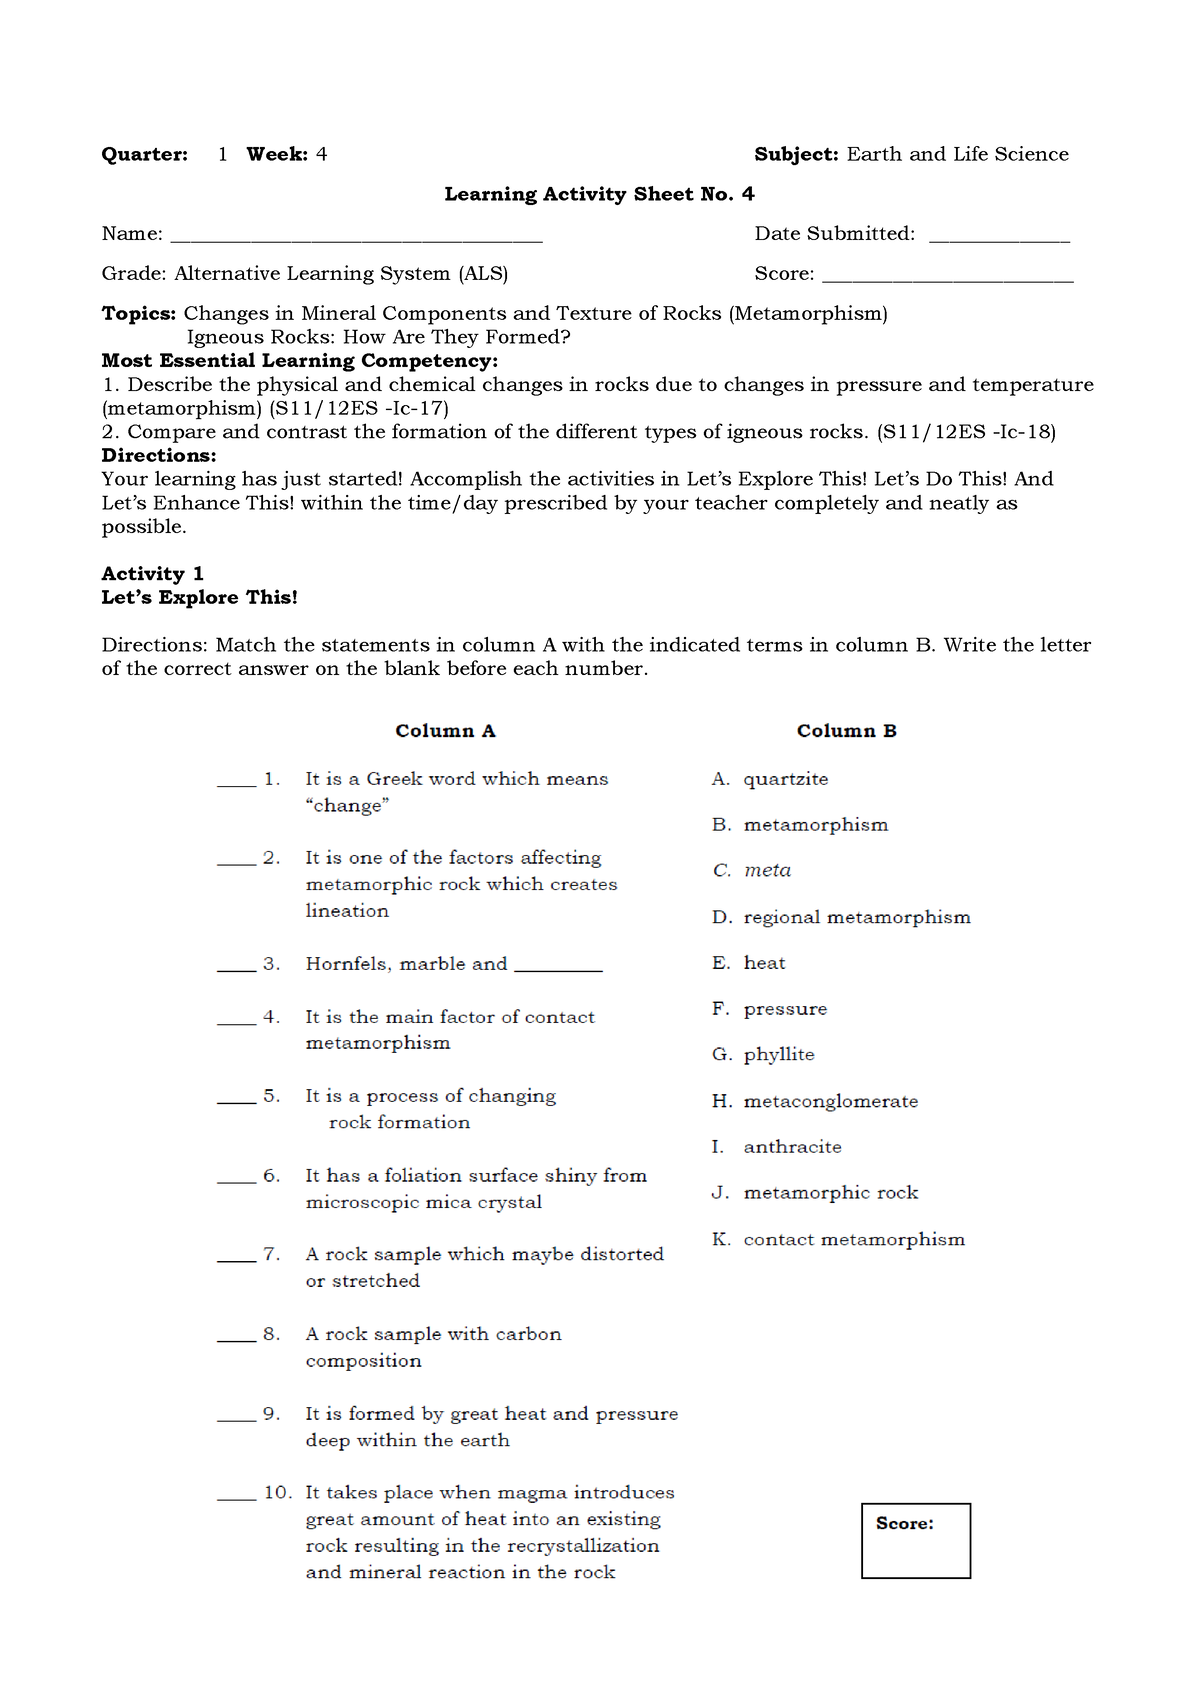 Learning Activity Sheet No. 4 ELS - Quarter: 1 Week: 4 Subject: Earth ...